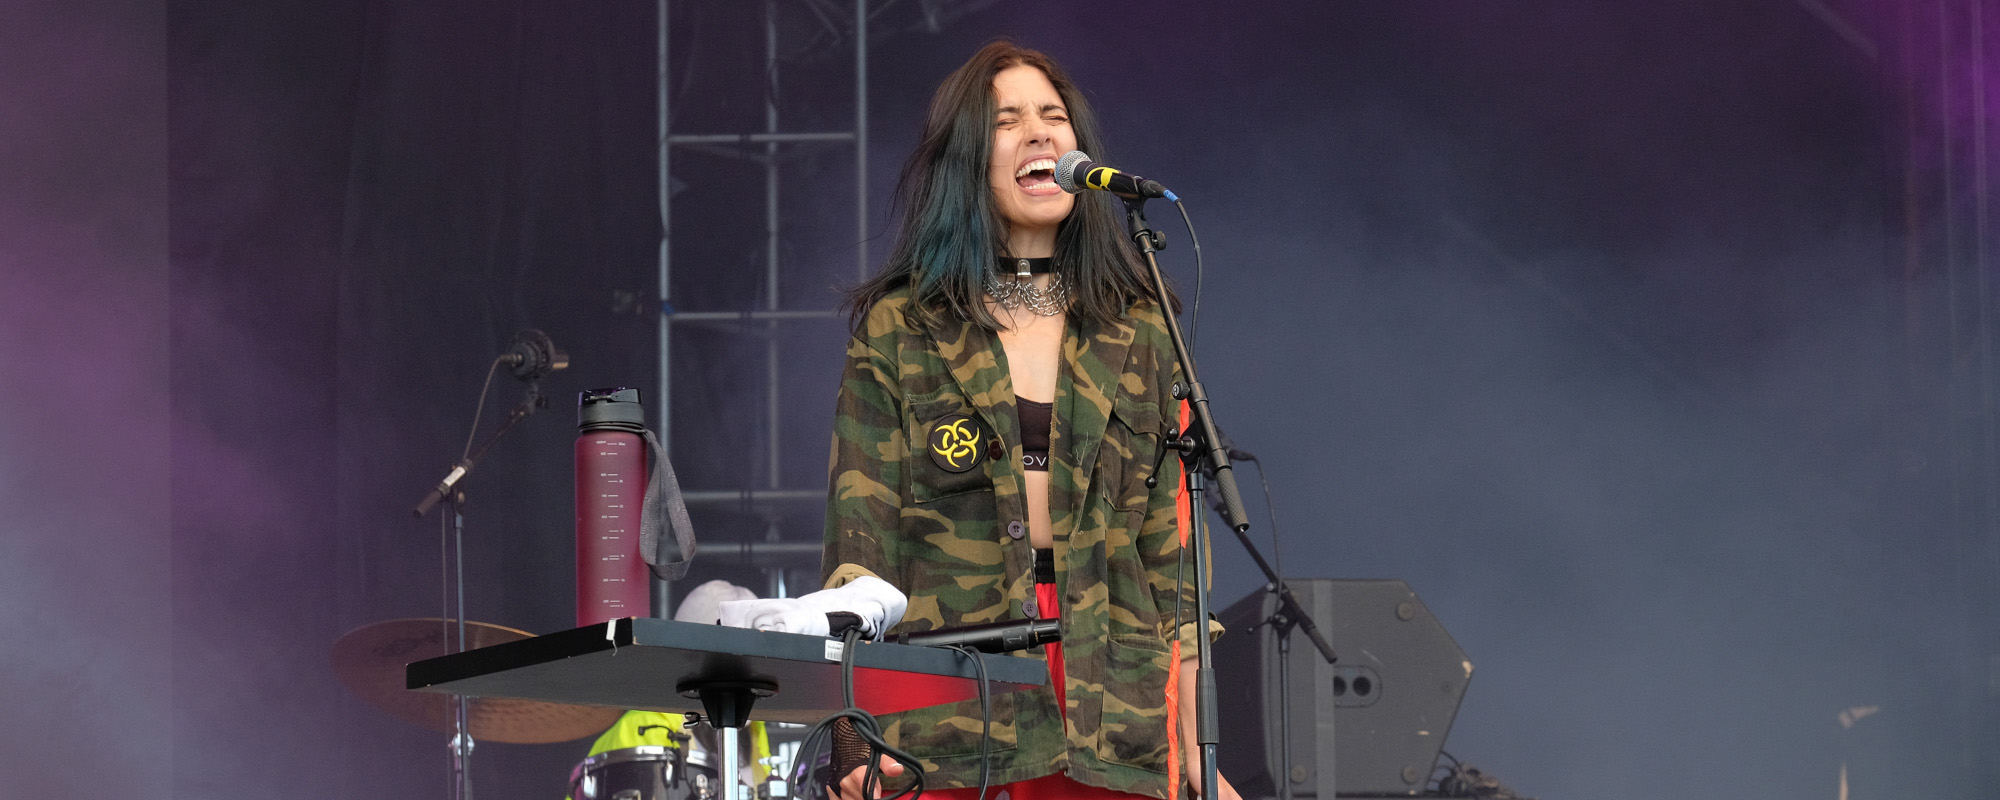 Pussy Riot’s Nadya Tolonnikova Shares What WNBA Star Brittney Griner Will Likely Face in Russian Penal Colony